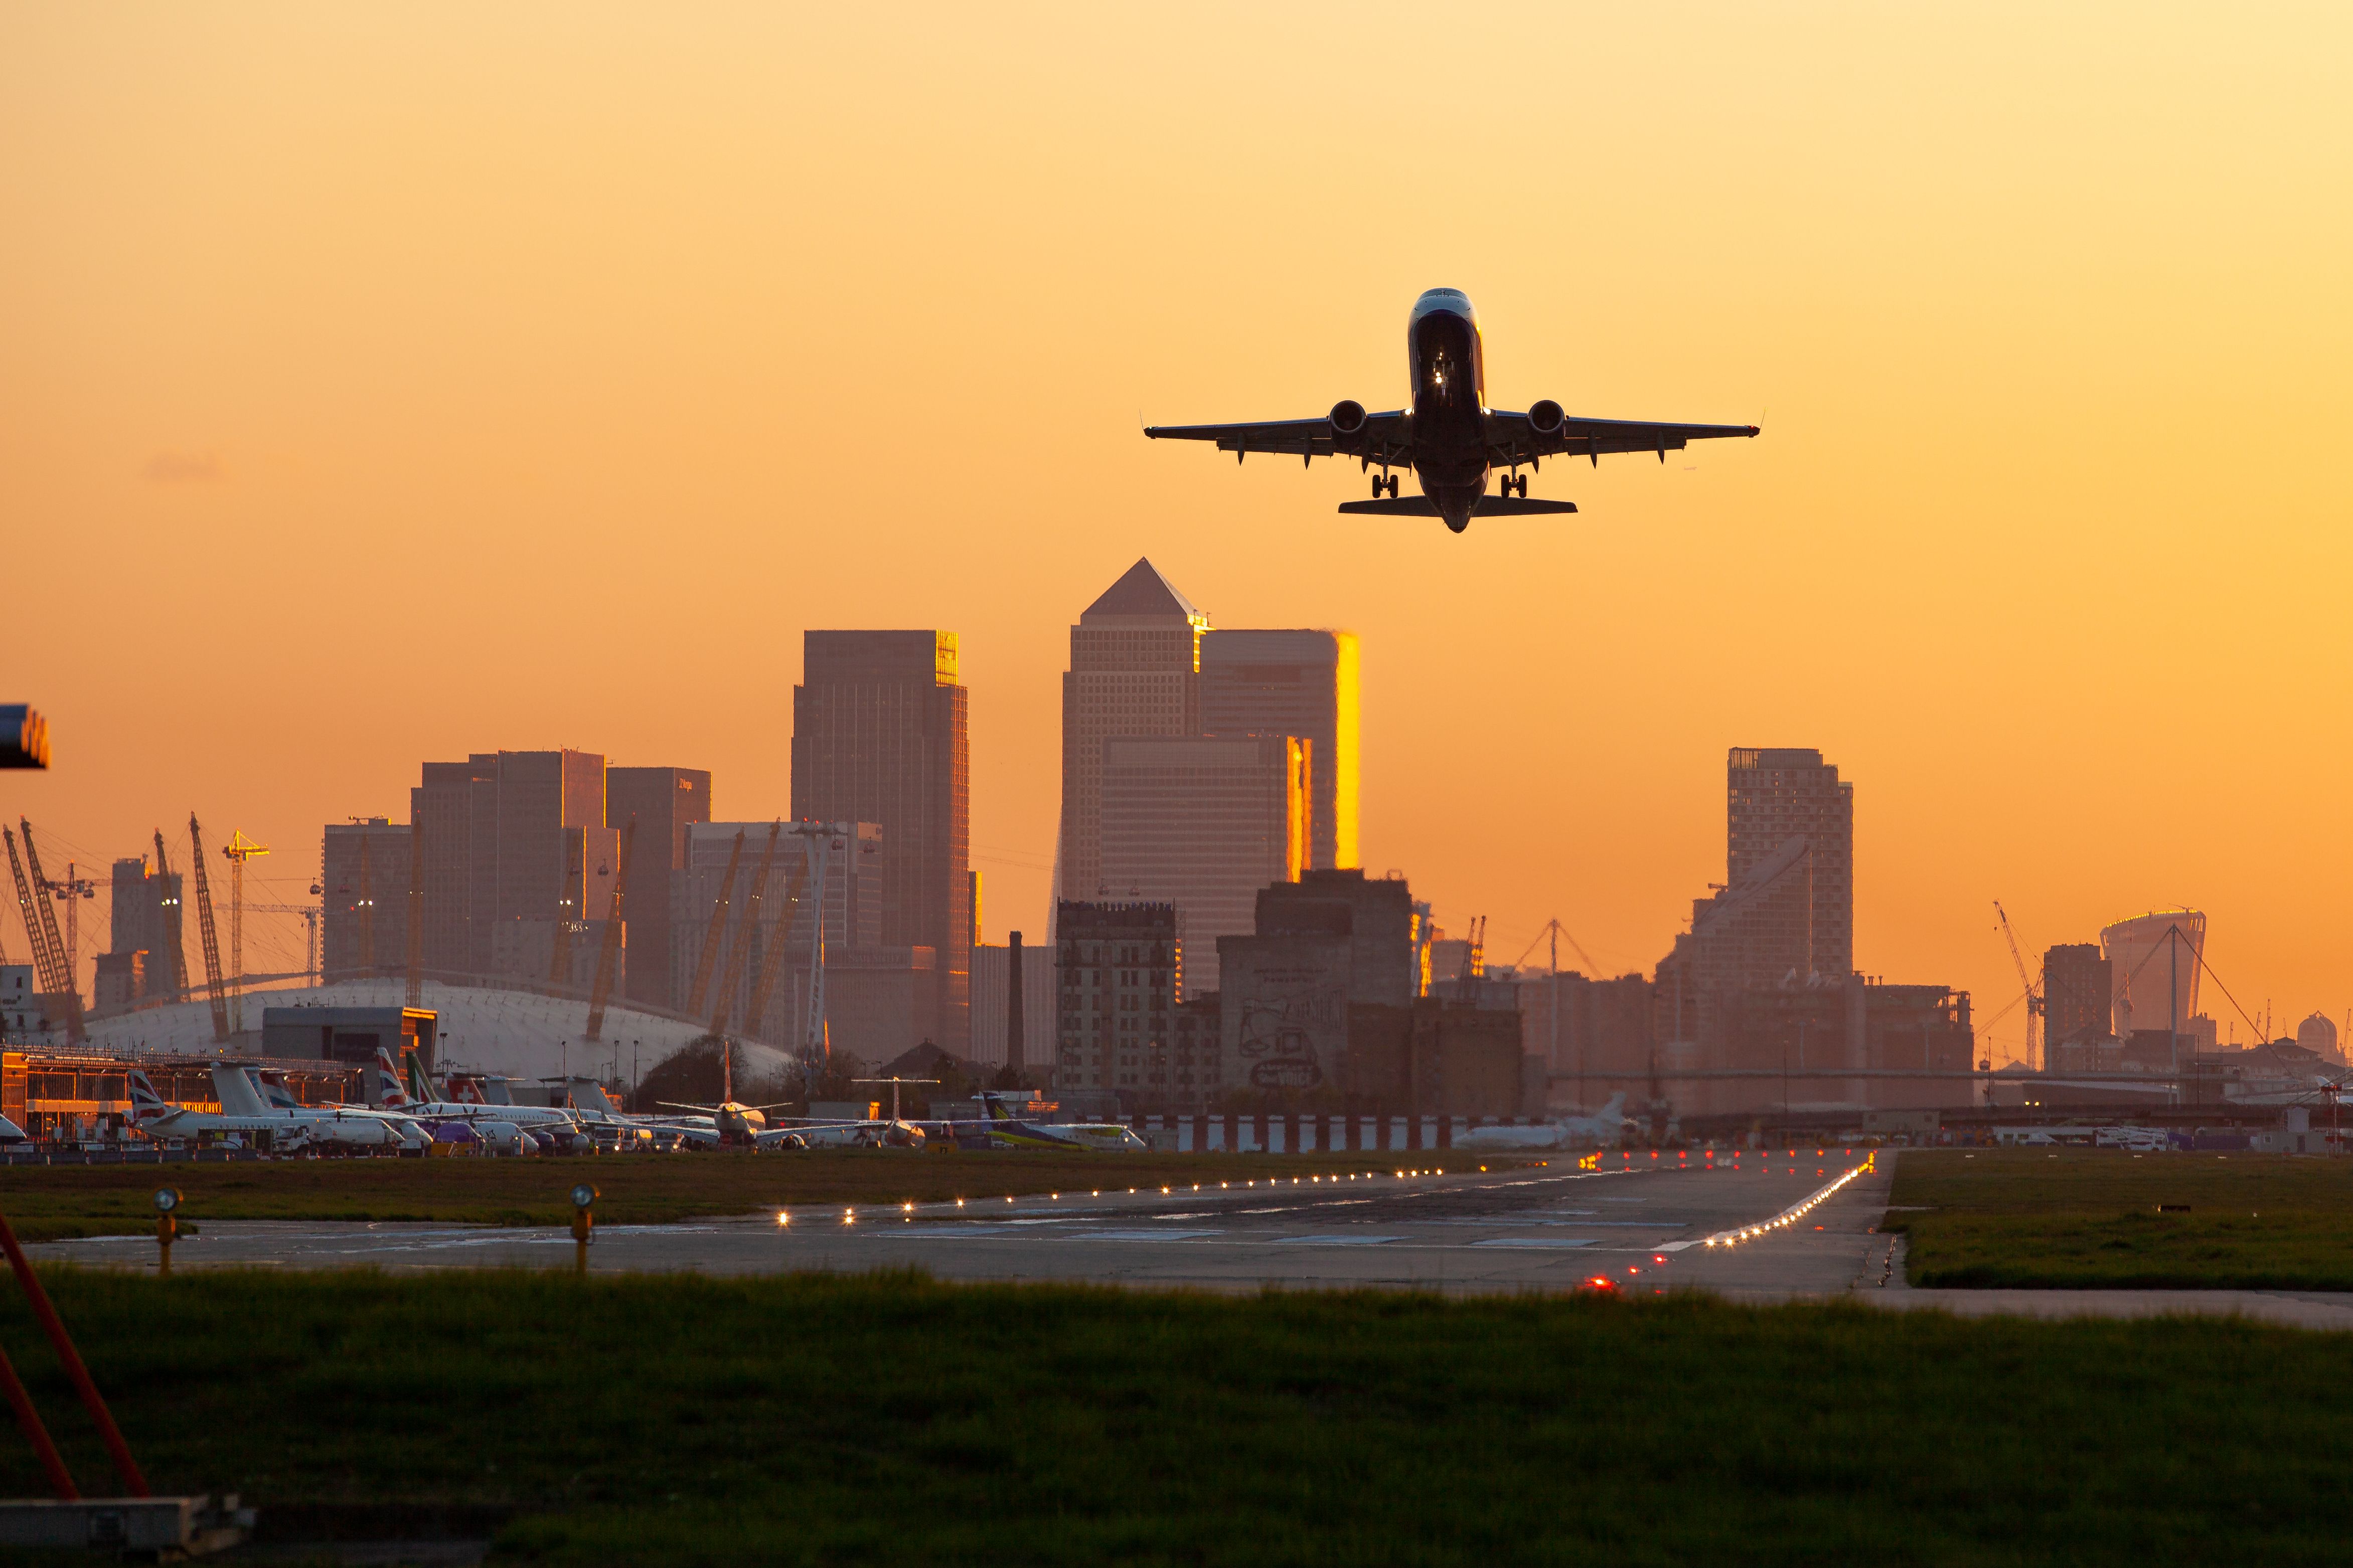 An aircraft taking off from London City Airport.